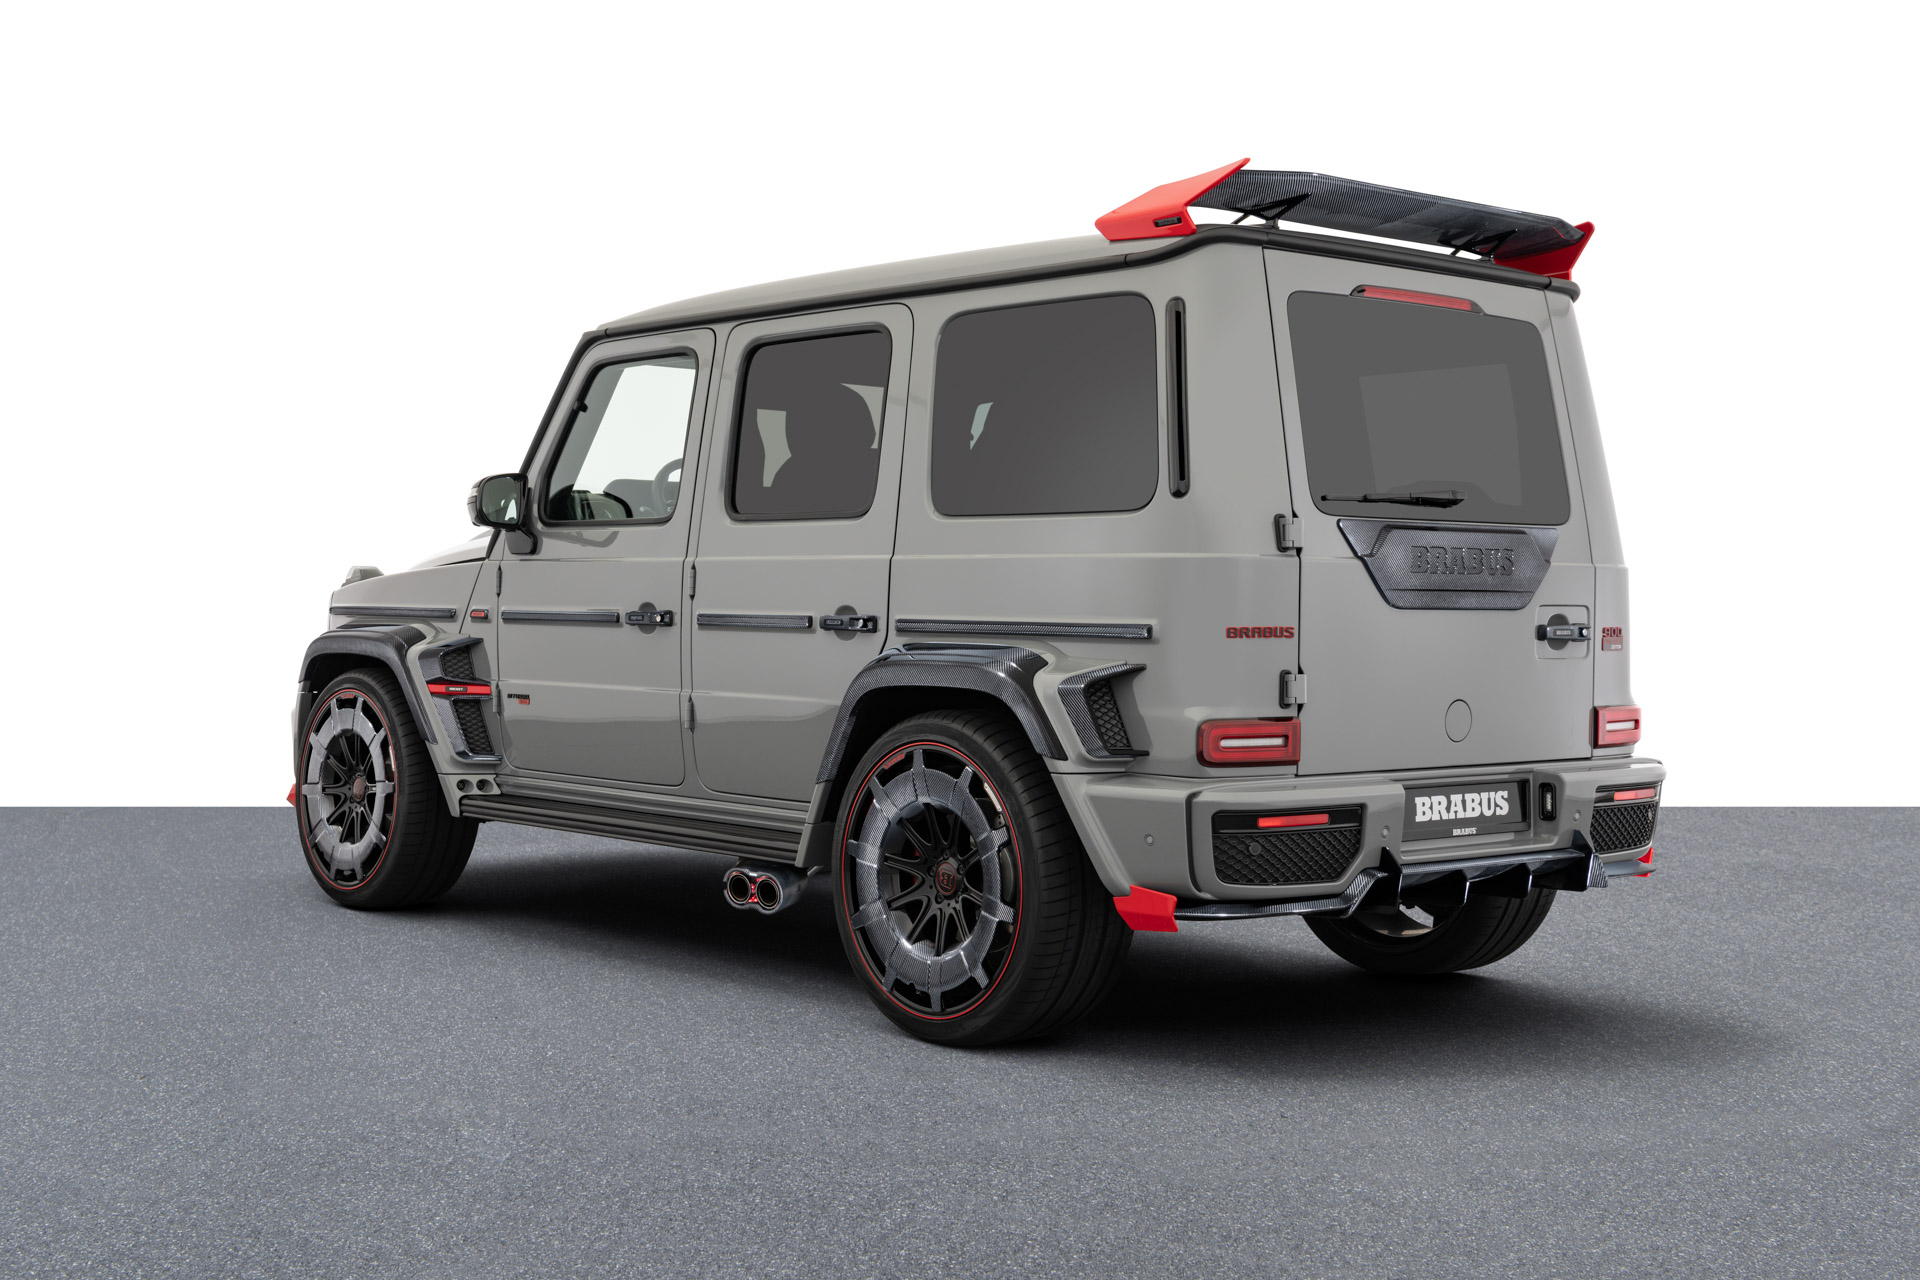 Check price and buy New BRABUS 900 Rocket Edition Mercedes-Benz AMG G 63 (W463A) For Sale